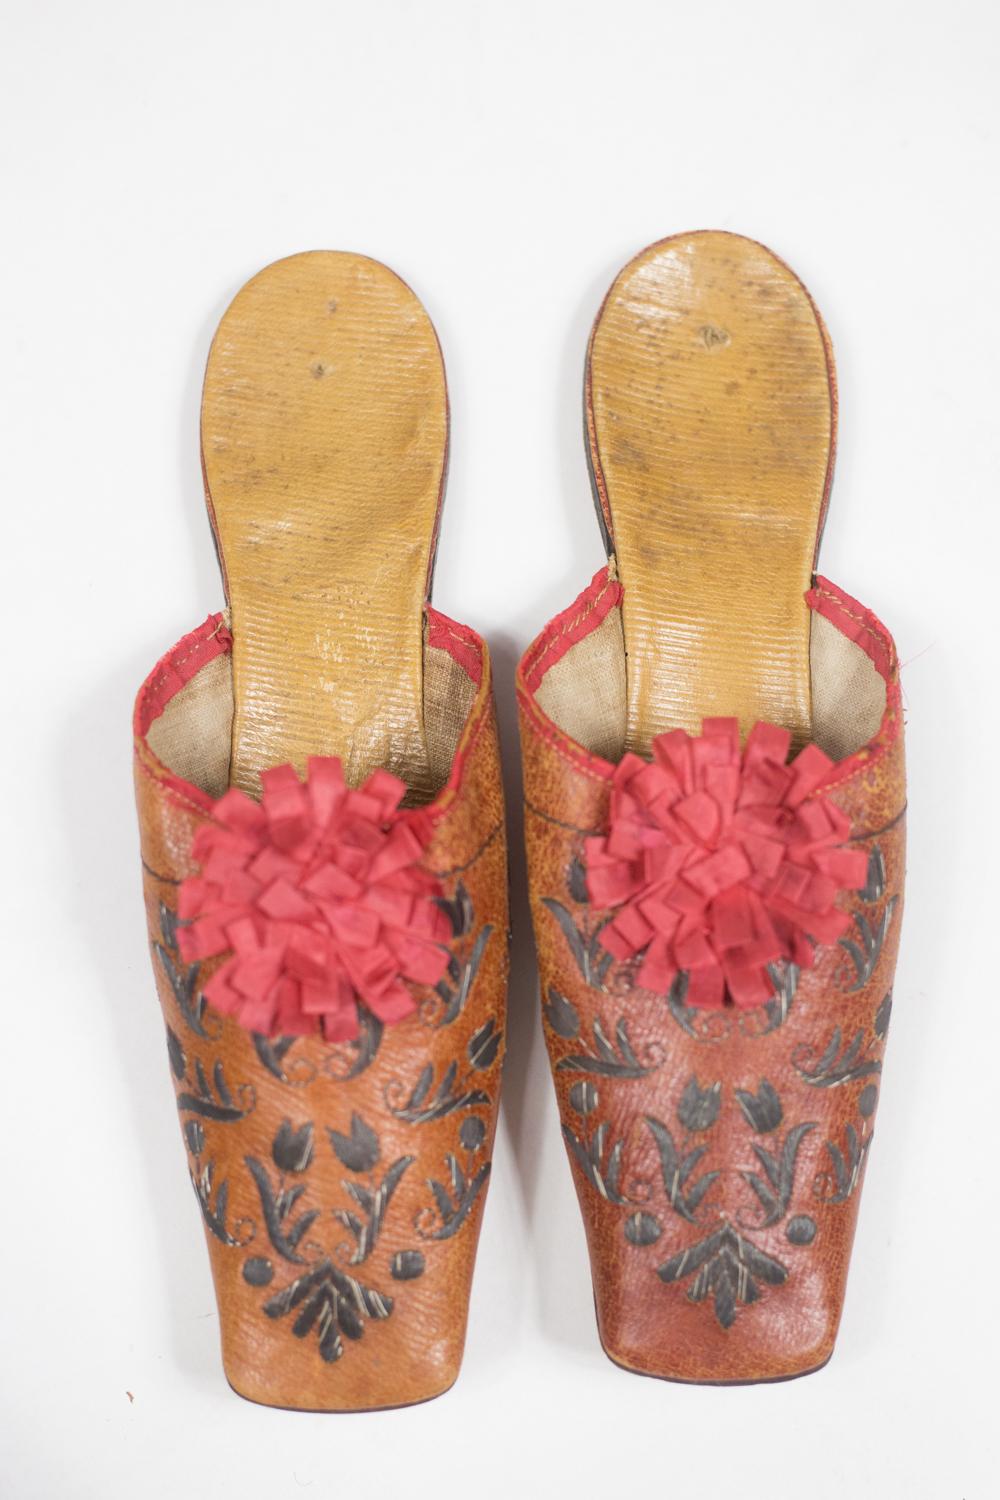 Brown Pair Of Leather Slippers Embroidered With Tulips - France Early 19c For Sale